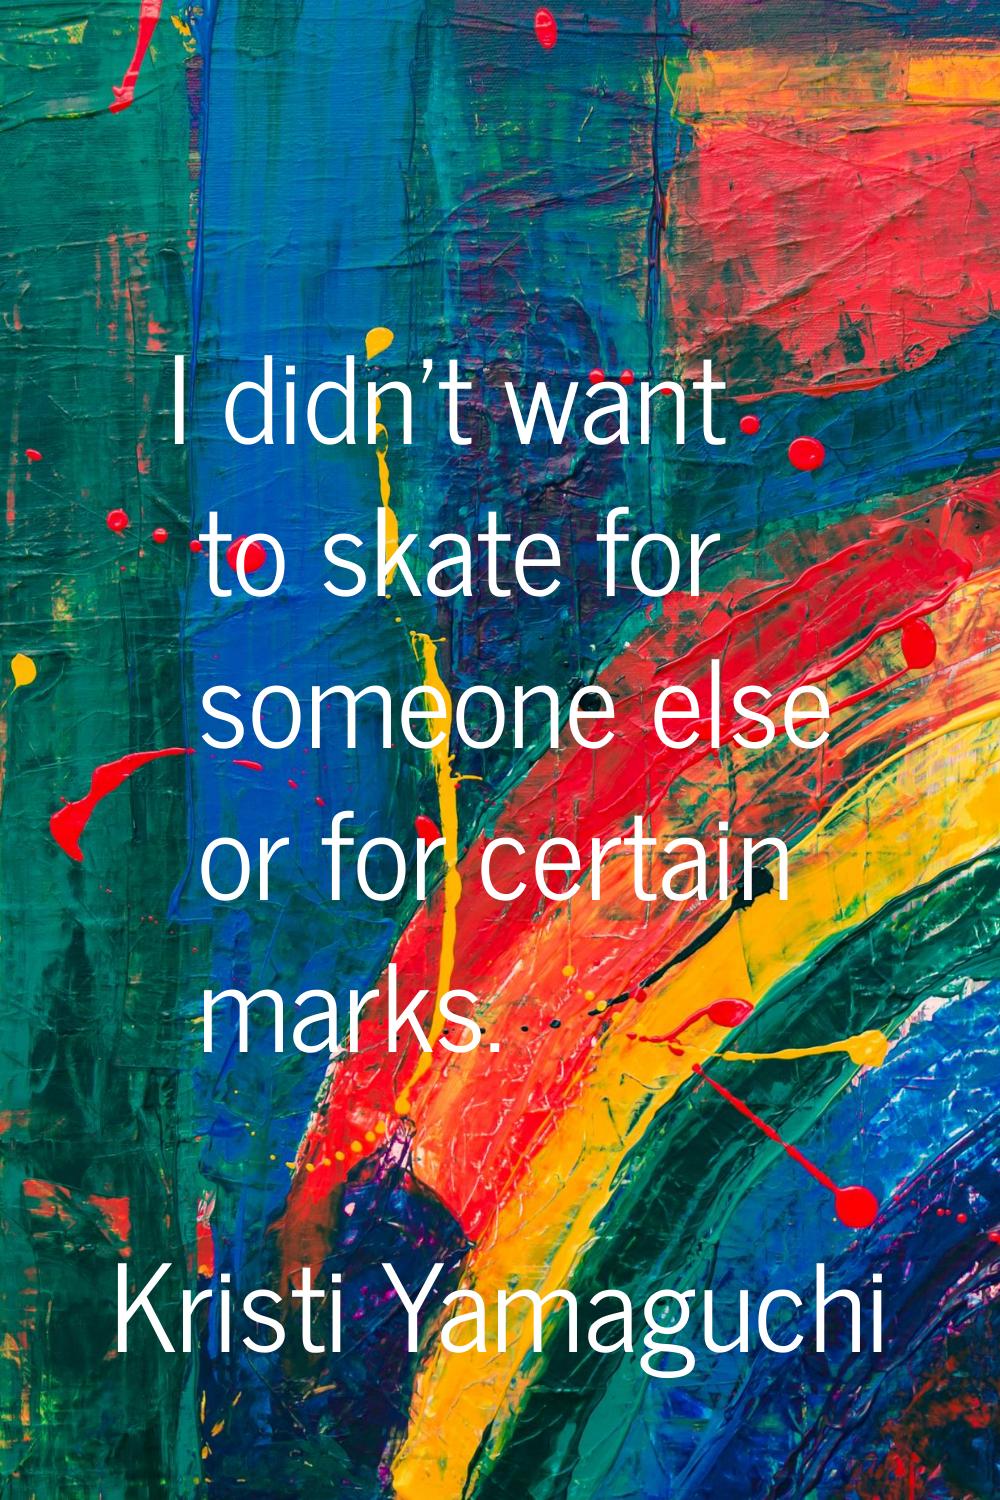 I didn't want to skate for someone else or for certain marks.